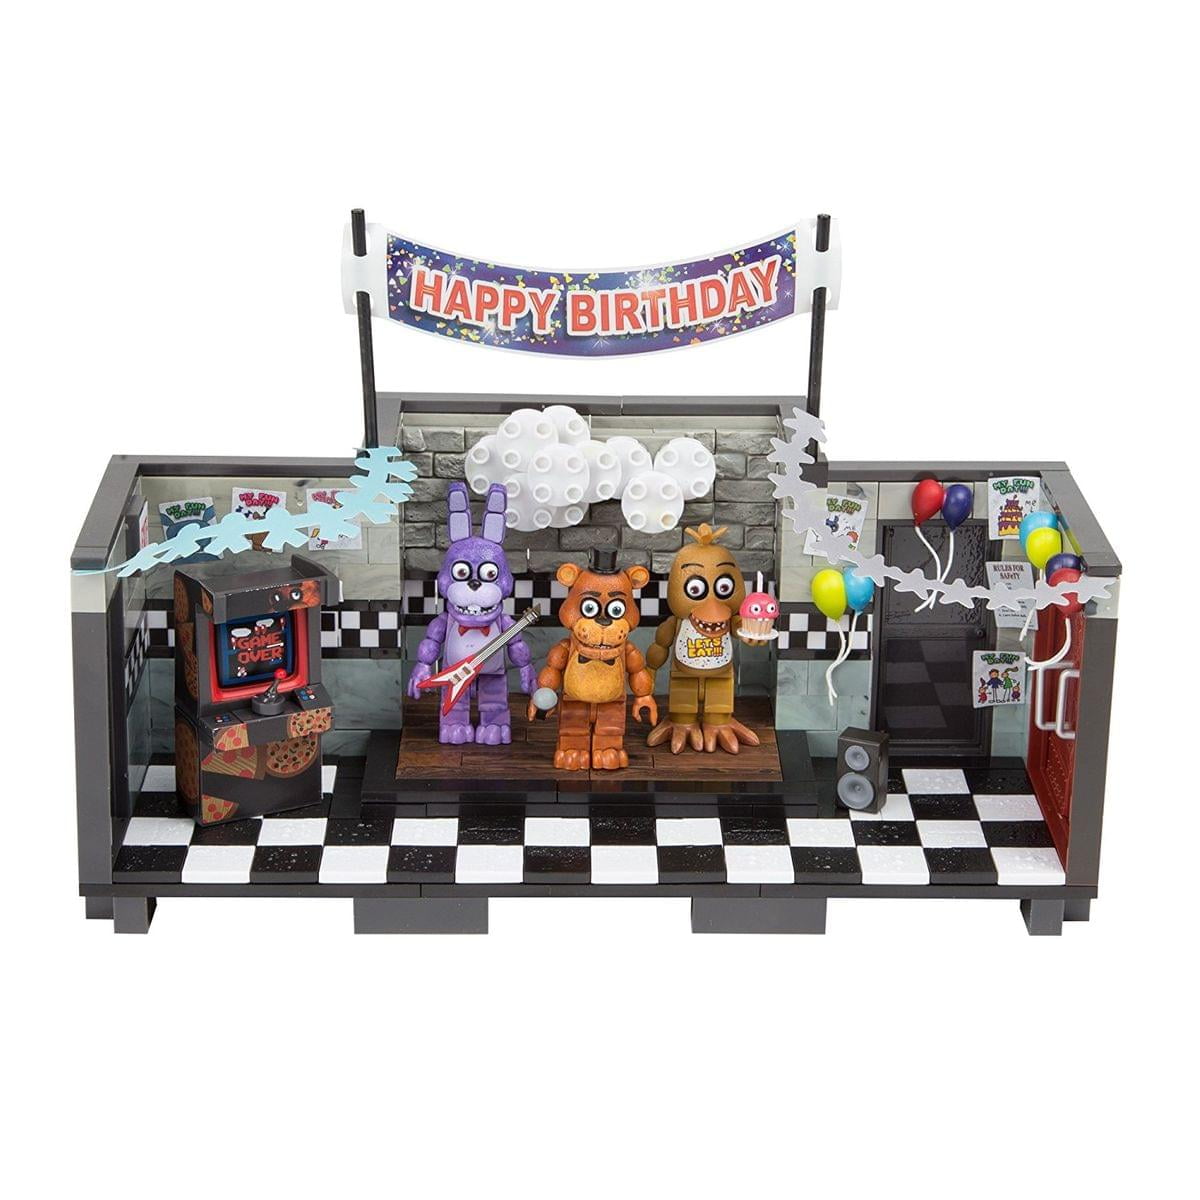 Five Nights at Freddy's Backstage Medium Construction Set Classic Edition